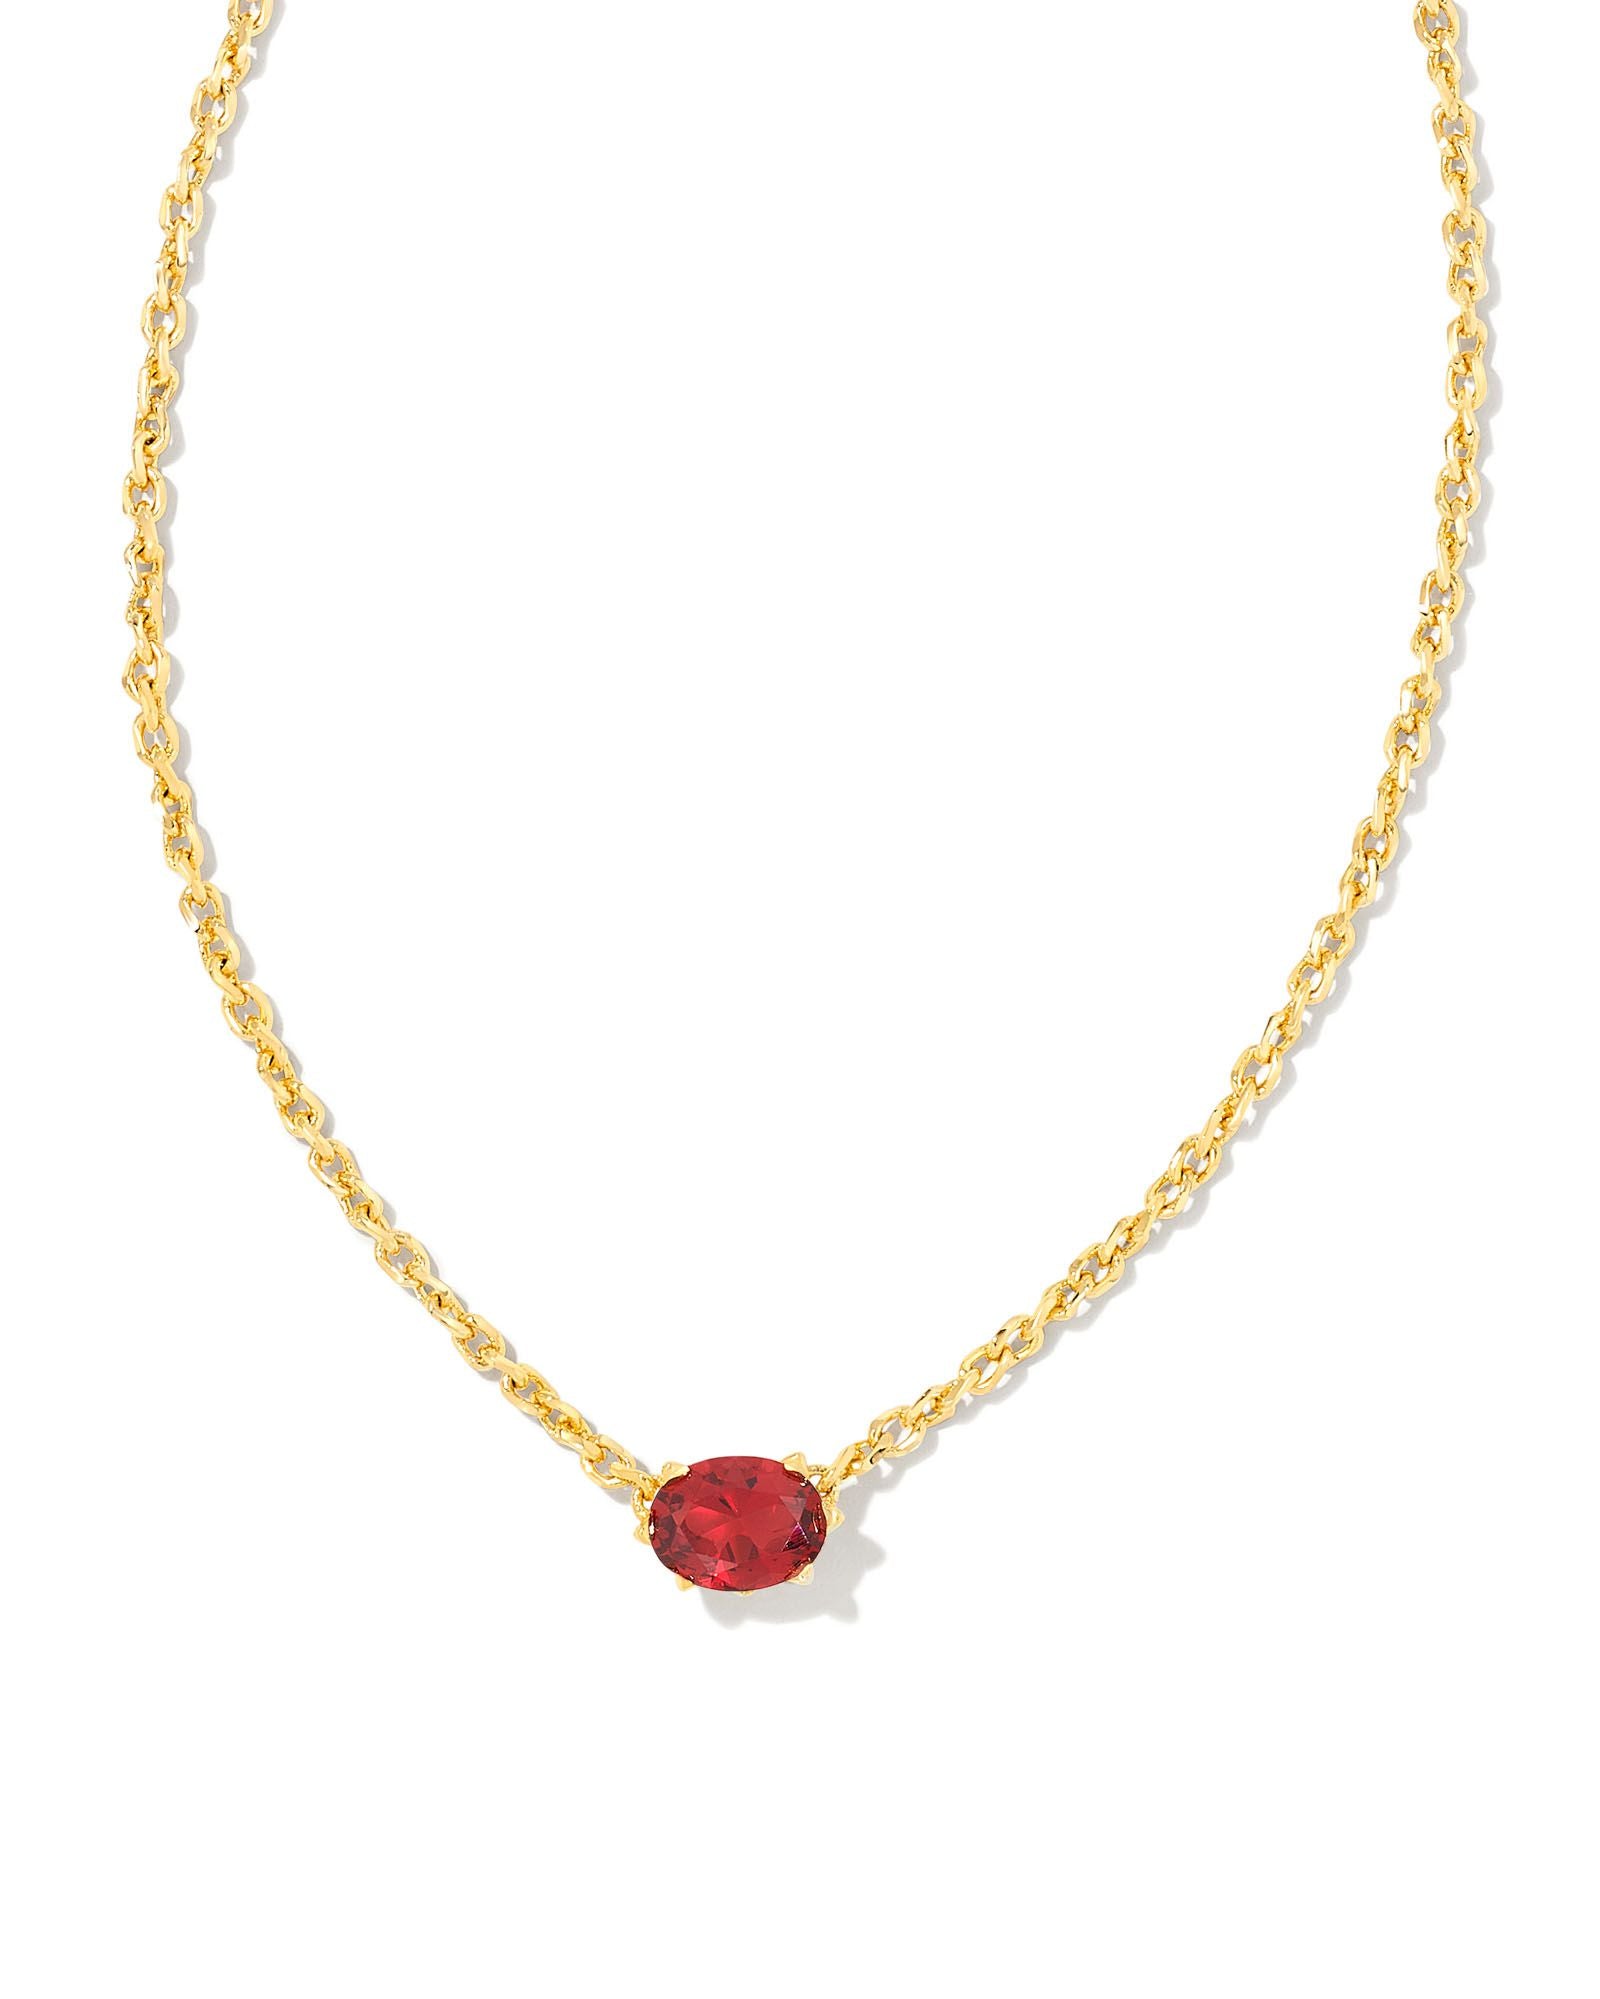 Kendra Scott Cailin Crystal Pendant Necklace In Gold Burgundy Crystal.